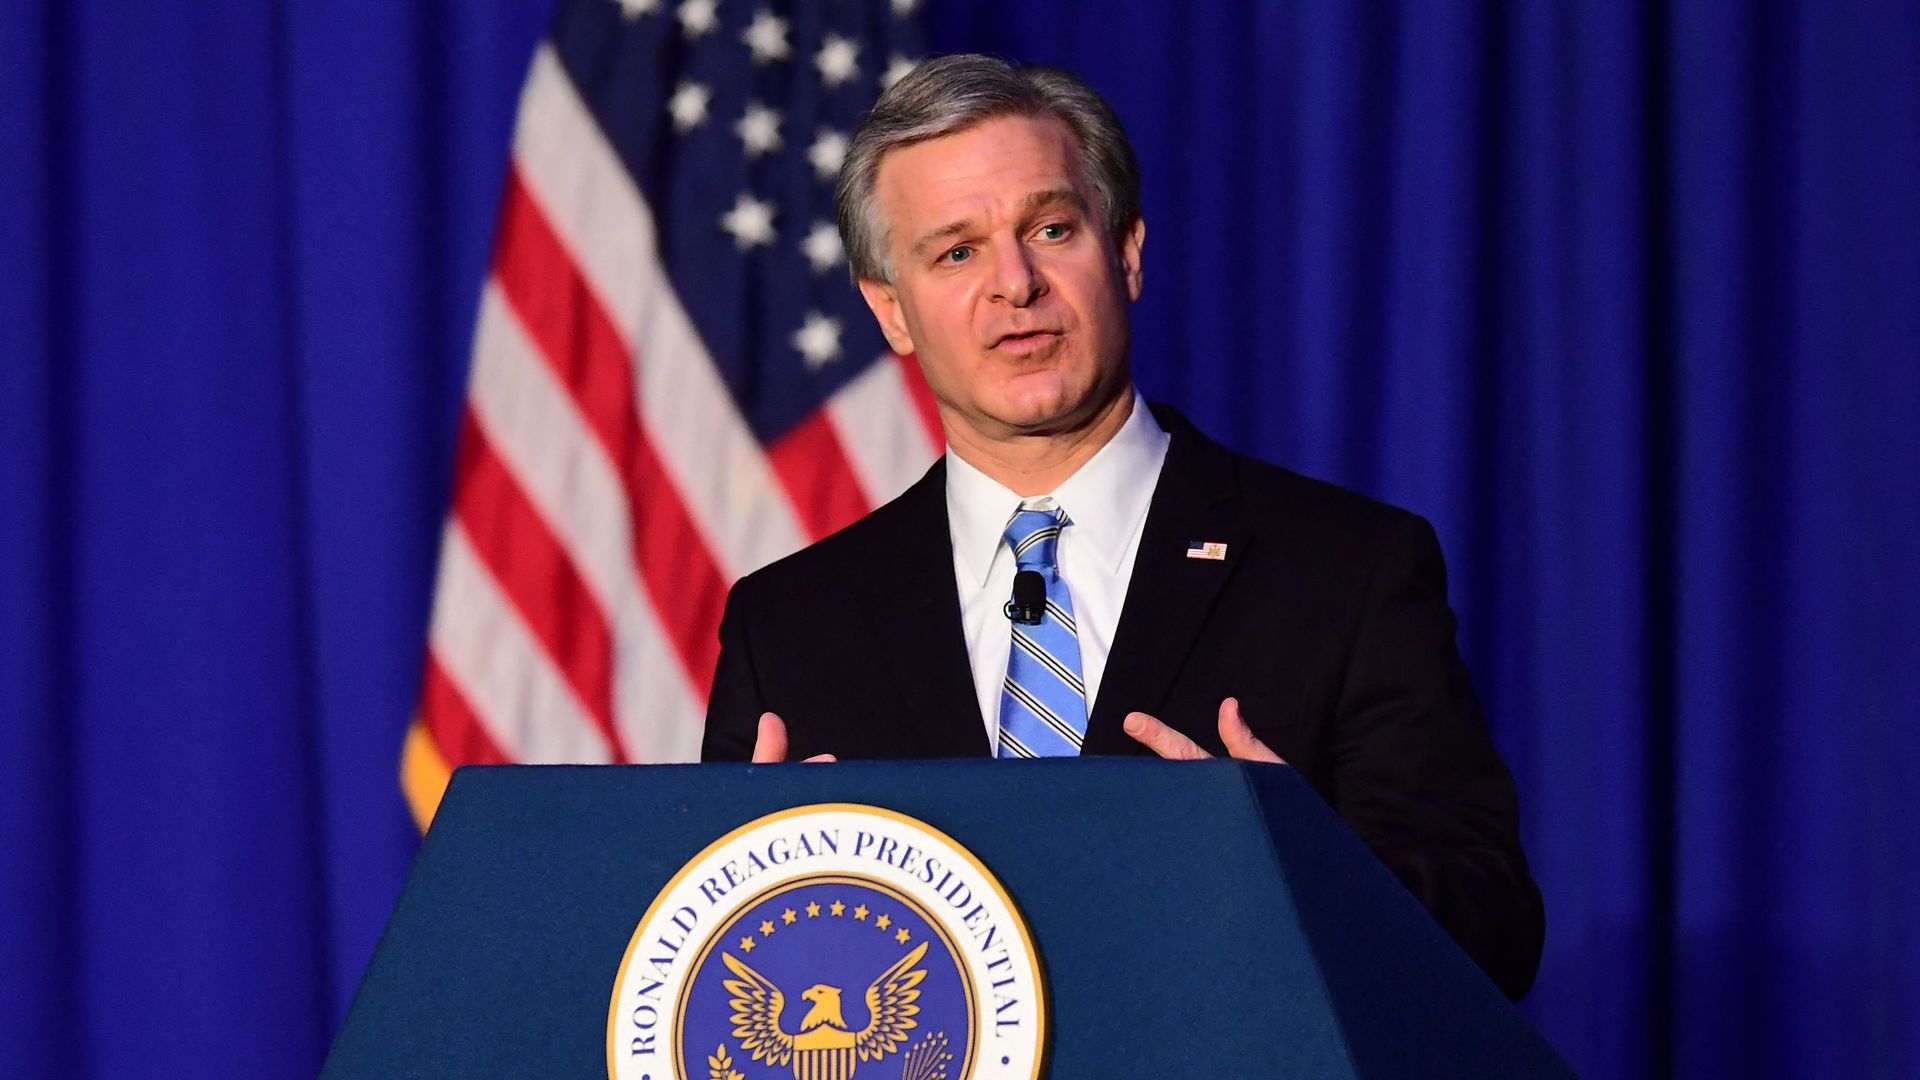 FBI Director Christopher Wray speaks at the Reagan Library in Simi Valley, California, January 31